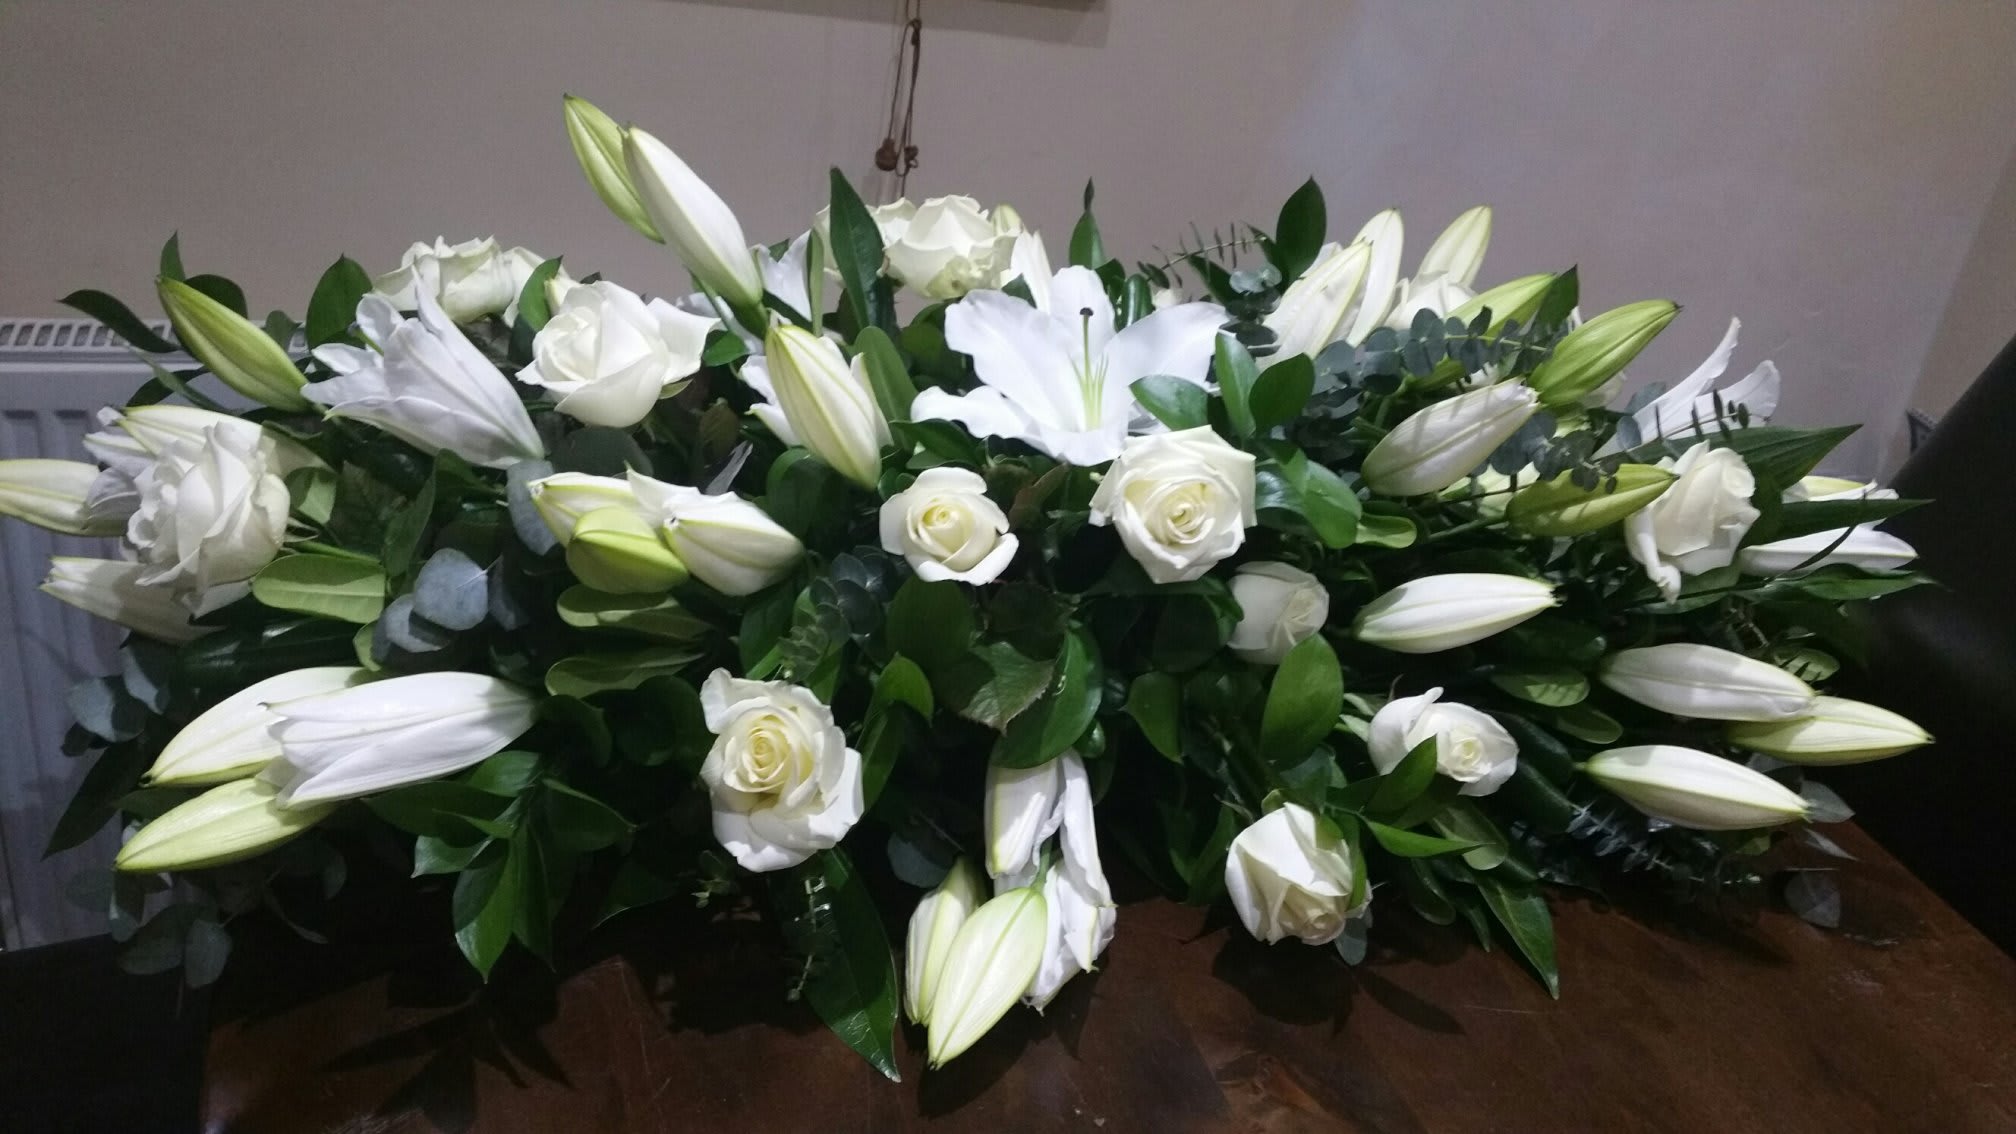 Personal Touch Funeral Planning Services London 020 7326 0860